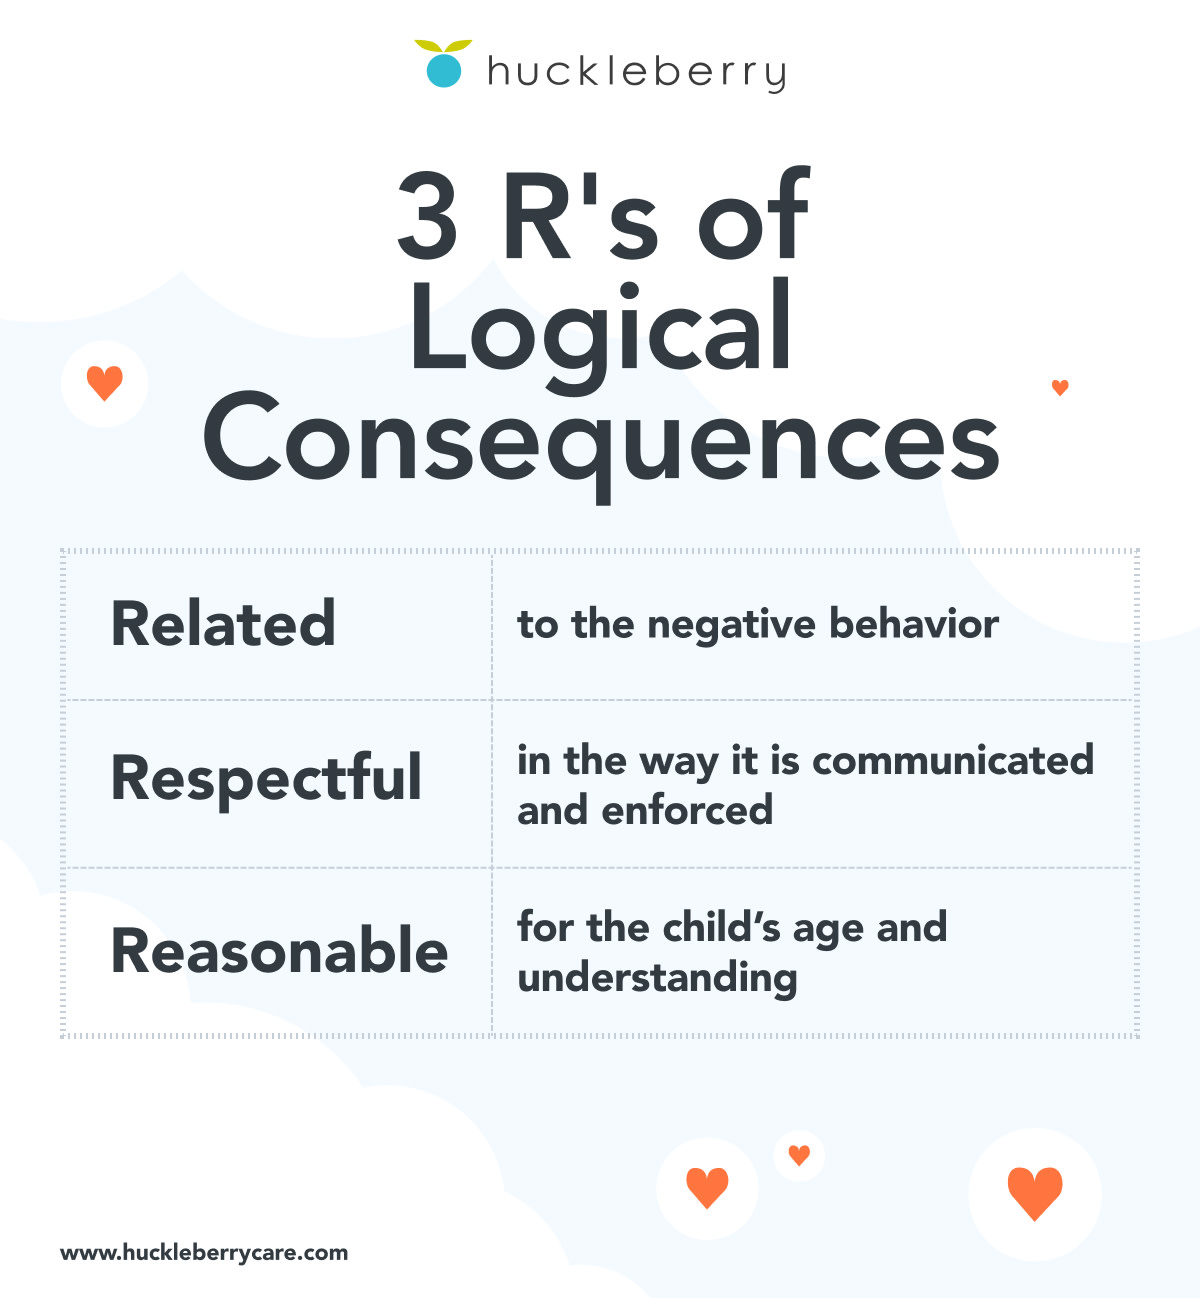 A graphic of the 3 R's of logical consequences.